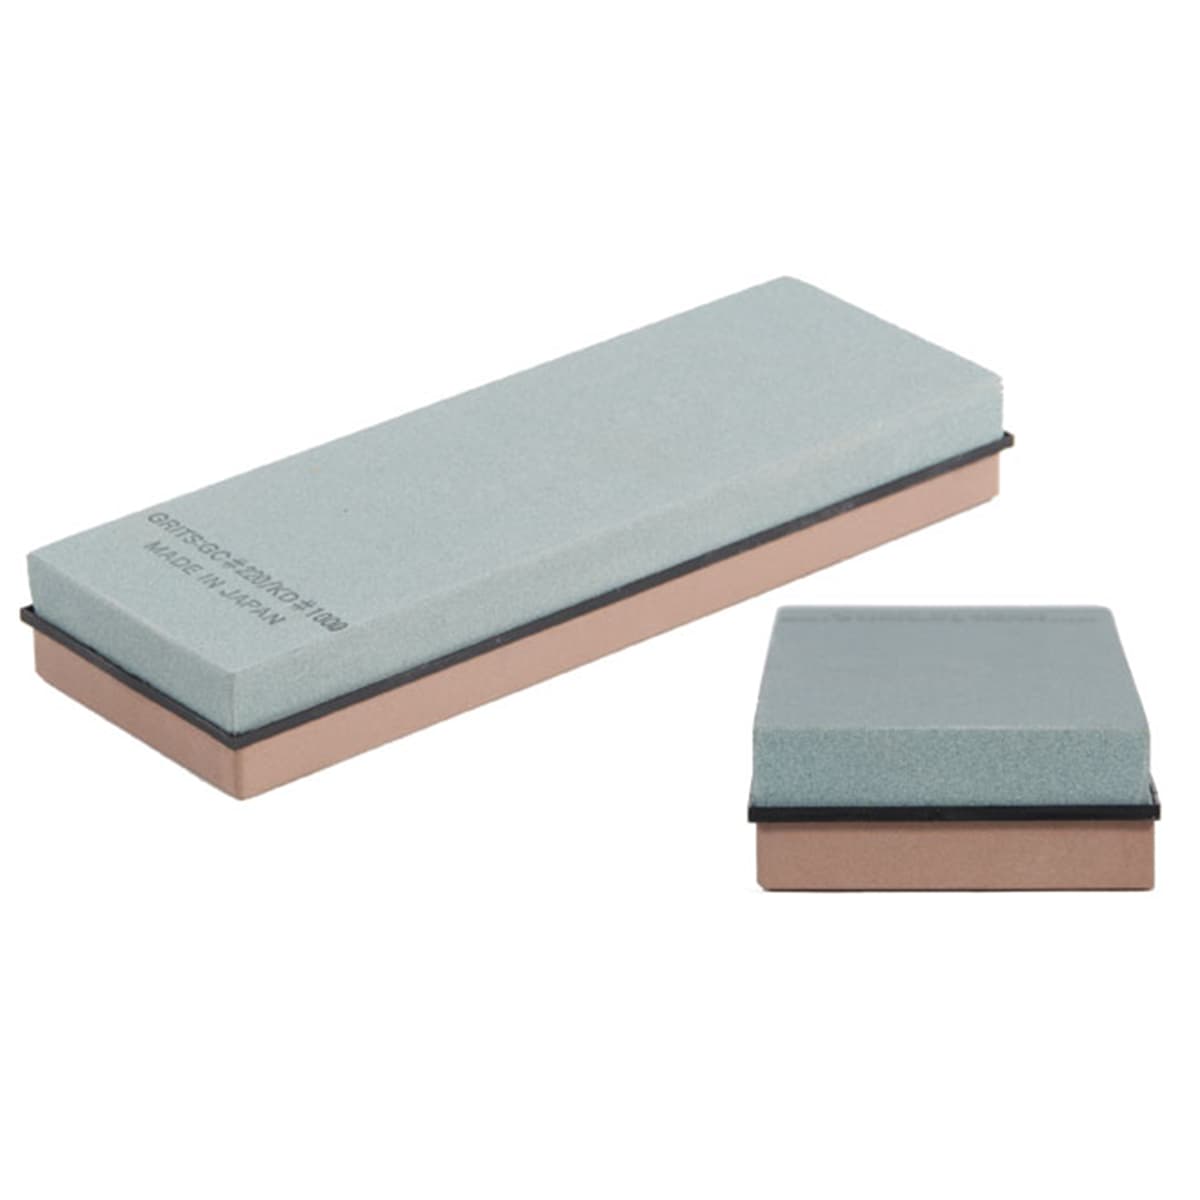 King Combination Japanese Waterstone - 220 / 1000 Grit